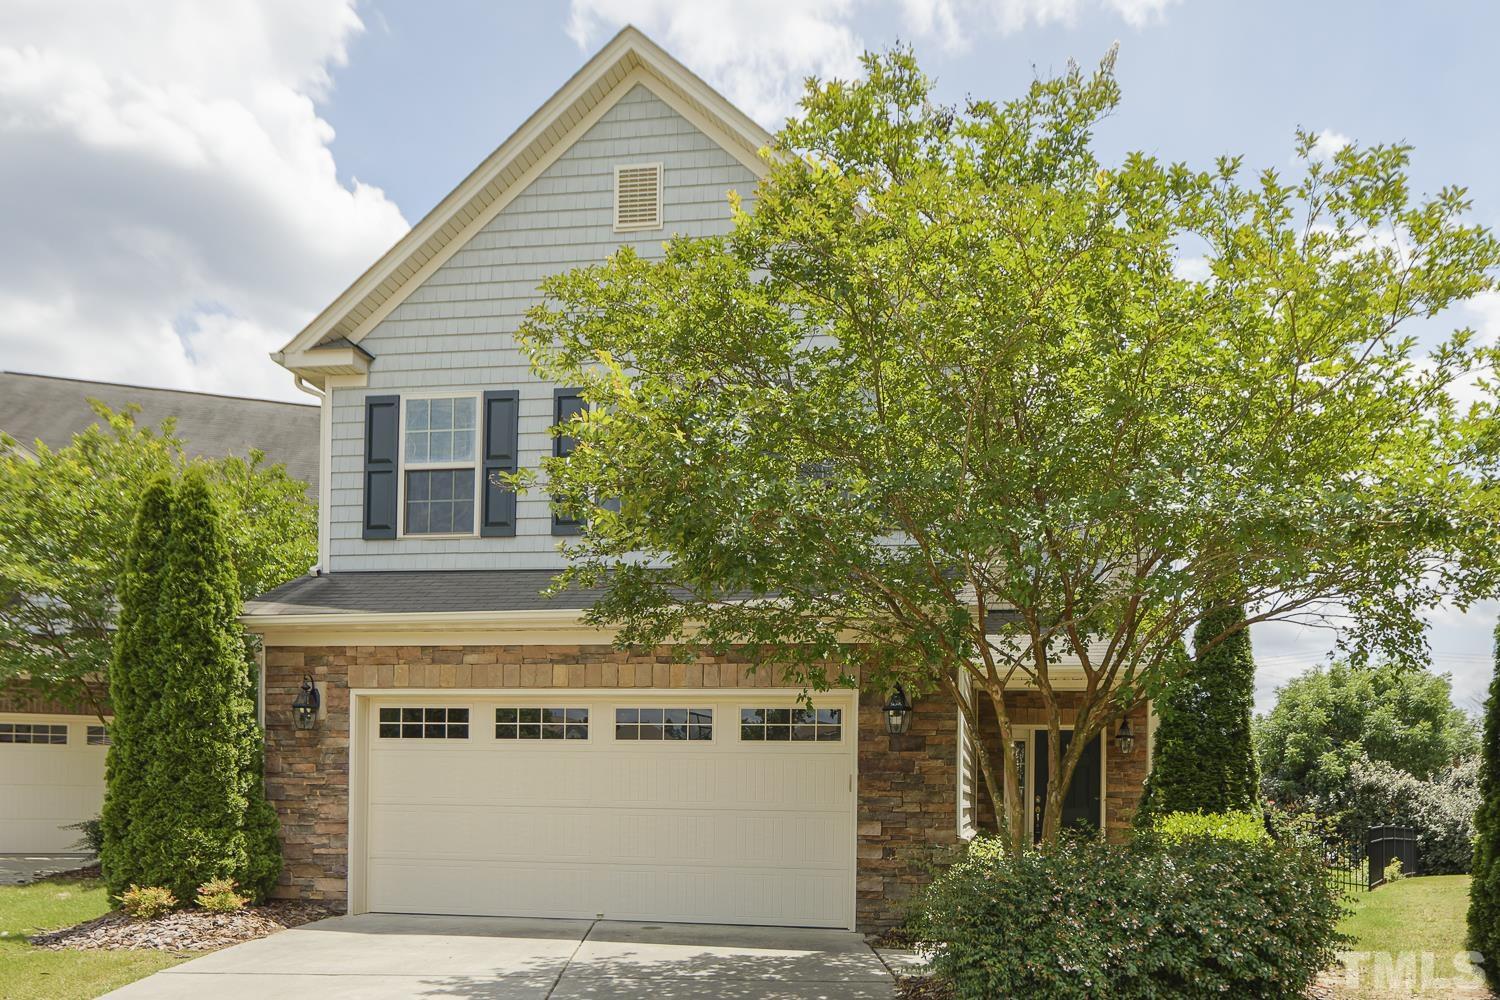 Move-in ready WEST CARY home. Many options with this floor plan. Large LOFT could be HOME OFFICE, GAME ROOM or HOME SCHOOL area. Gleaming HARDWOODS and fresh carpet!